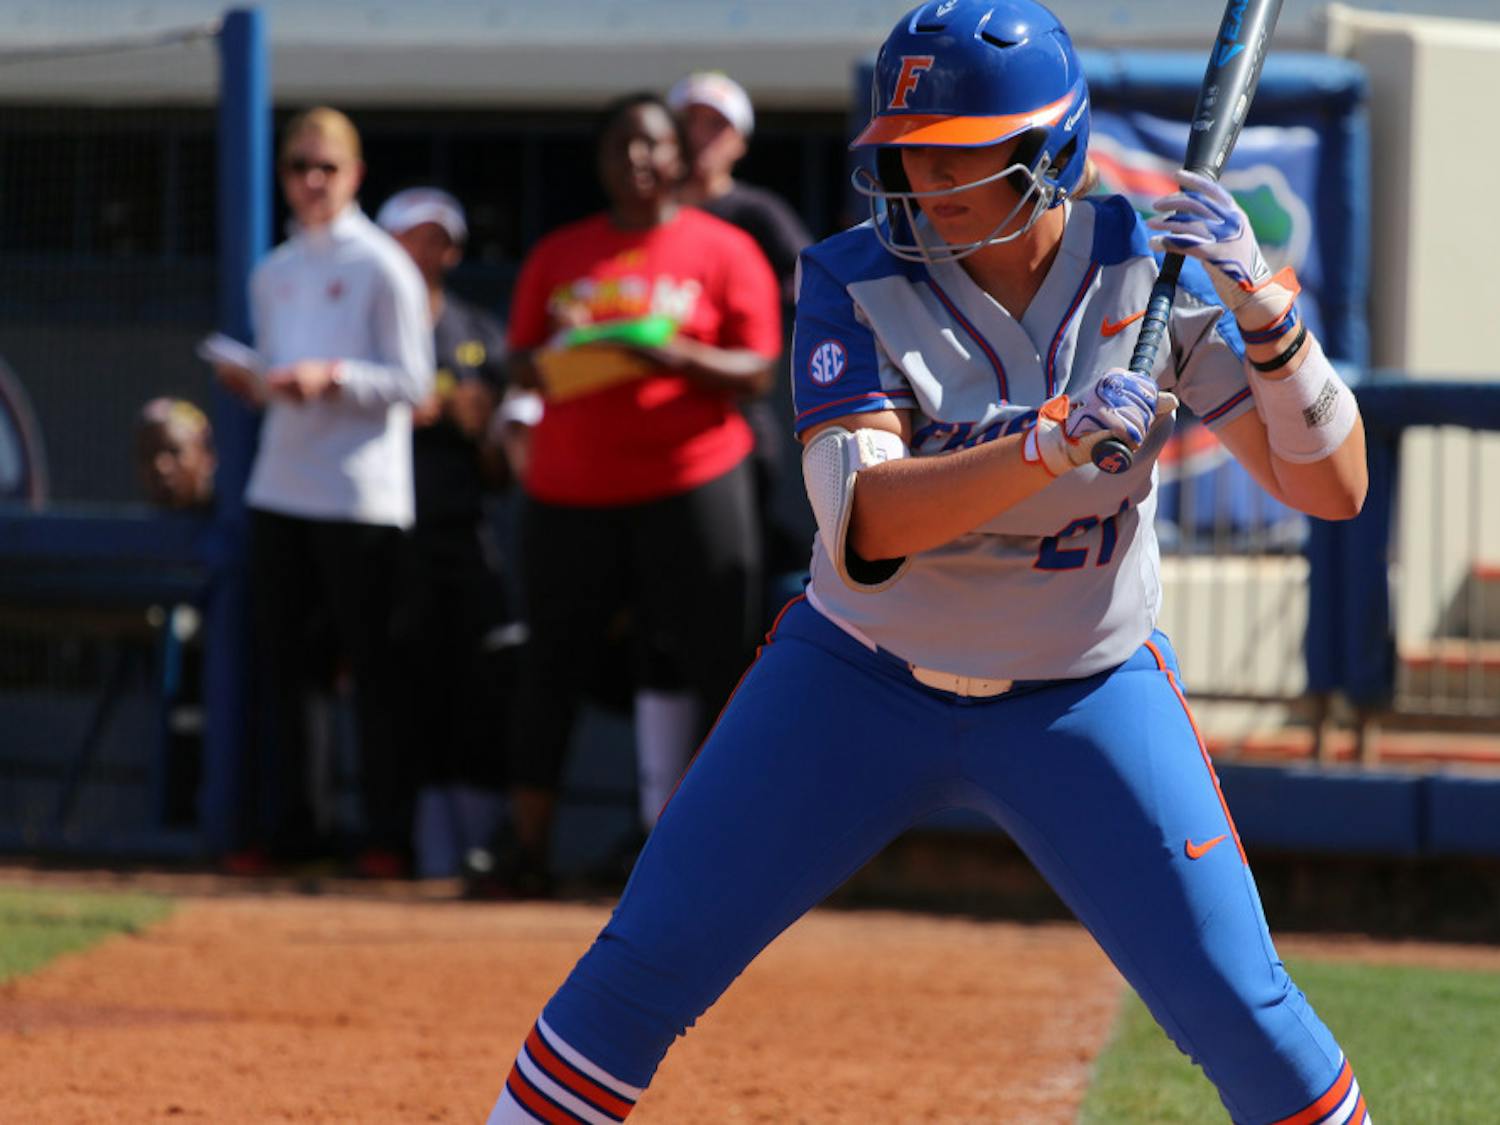 It was left fielder Amanda Lorenz's birthday on Wednesday. She went 2 for 3 and scored a run in UF's 5-1 win over Florida State. 